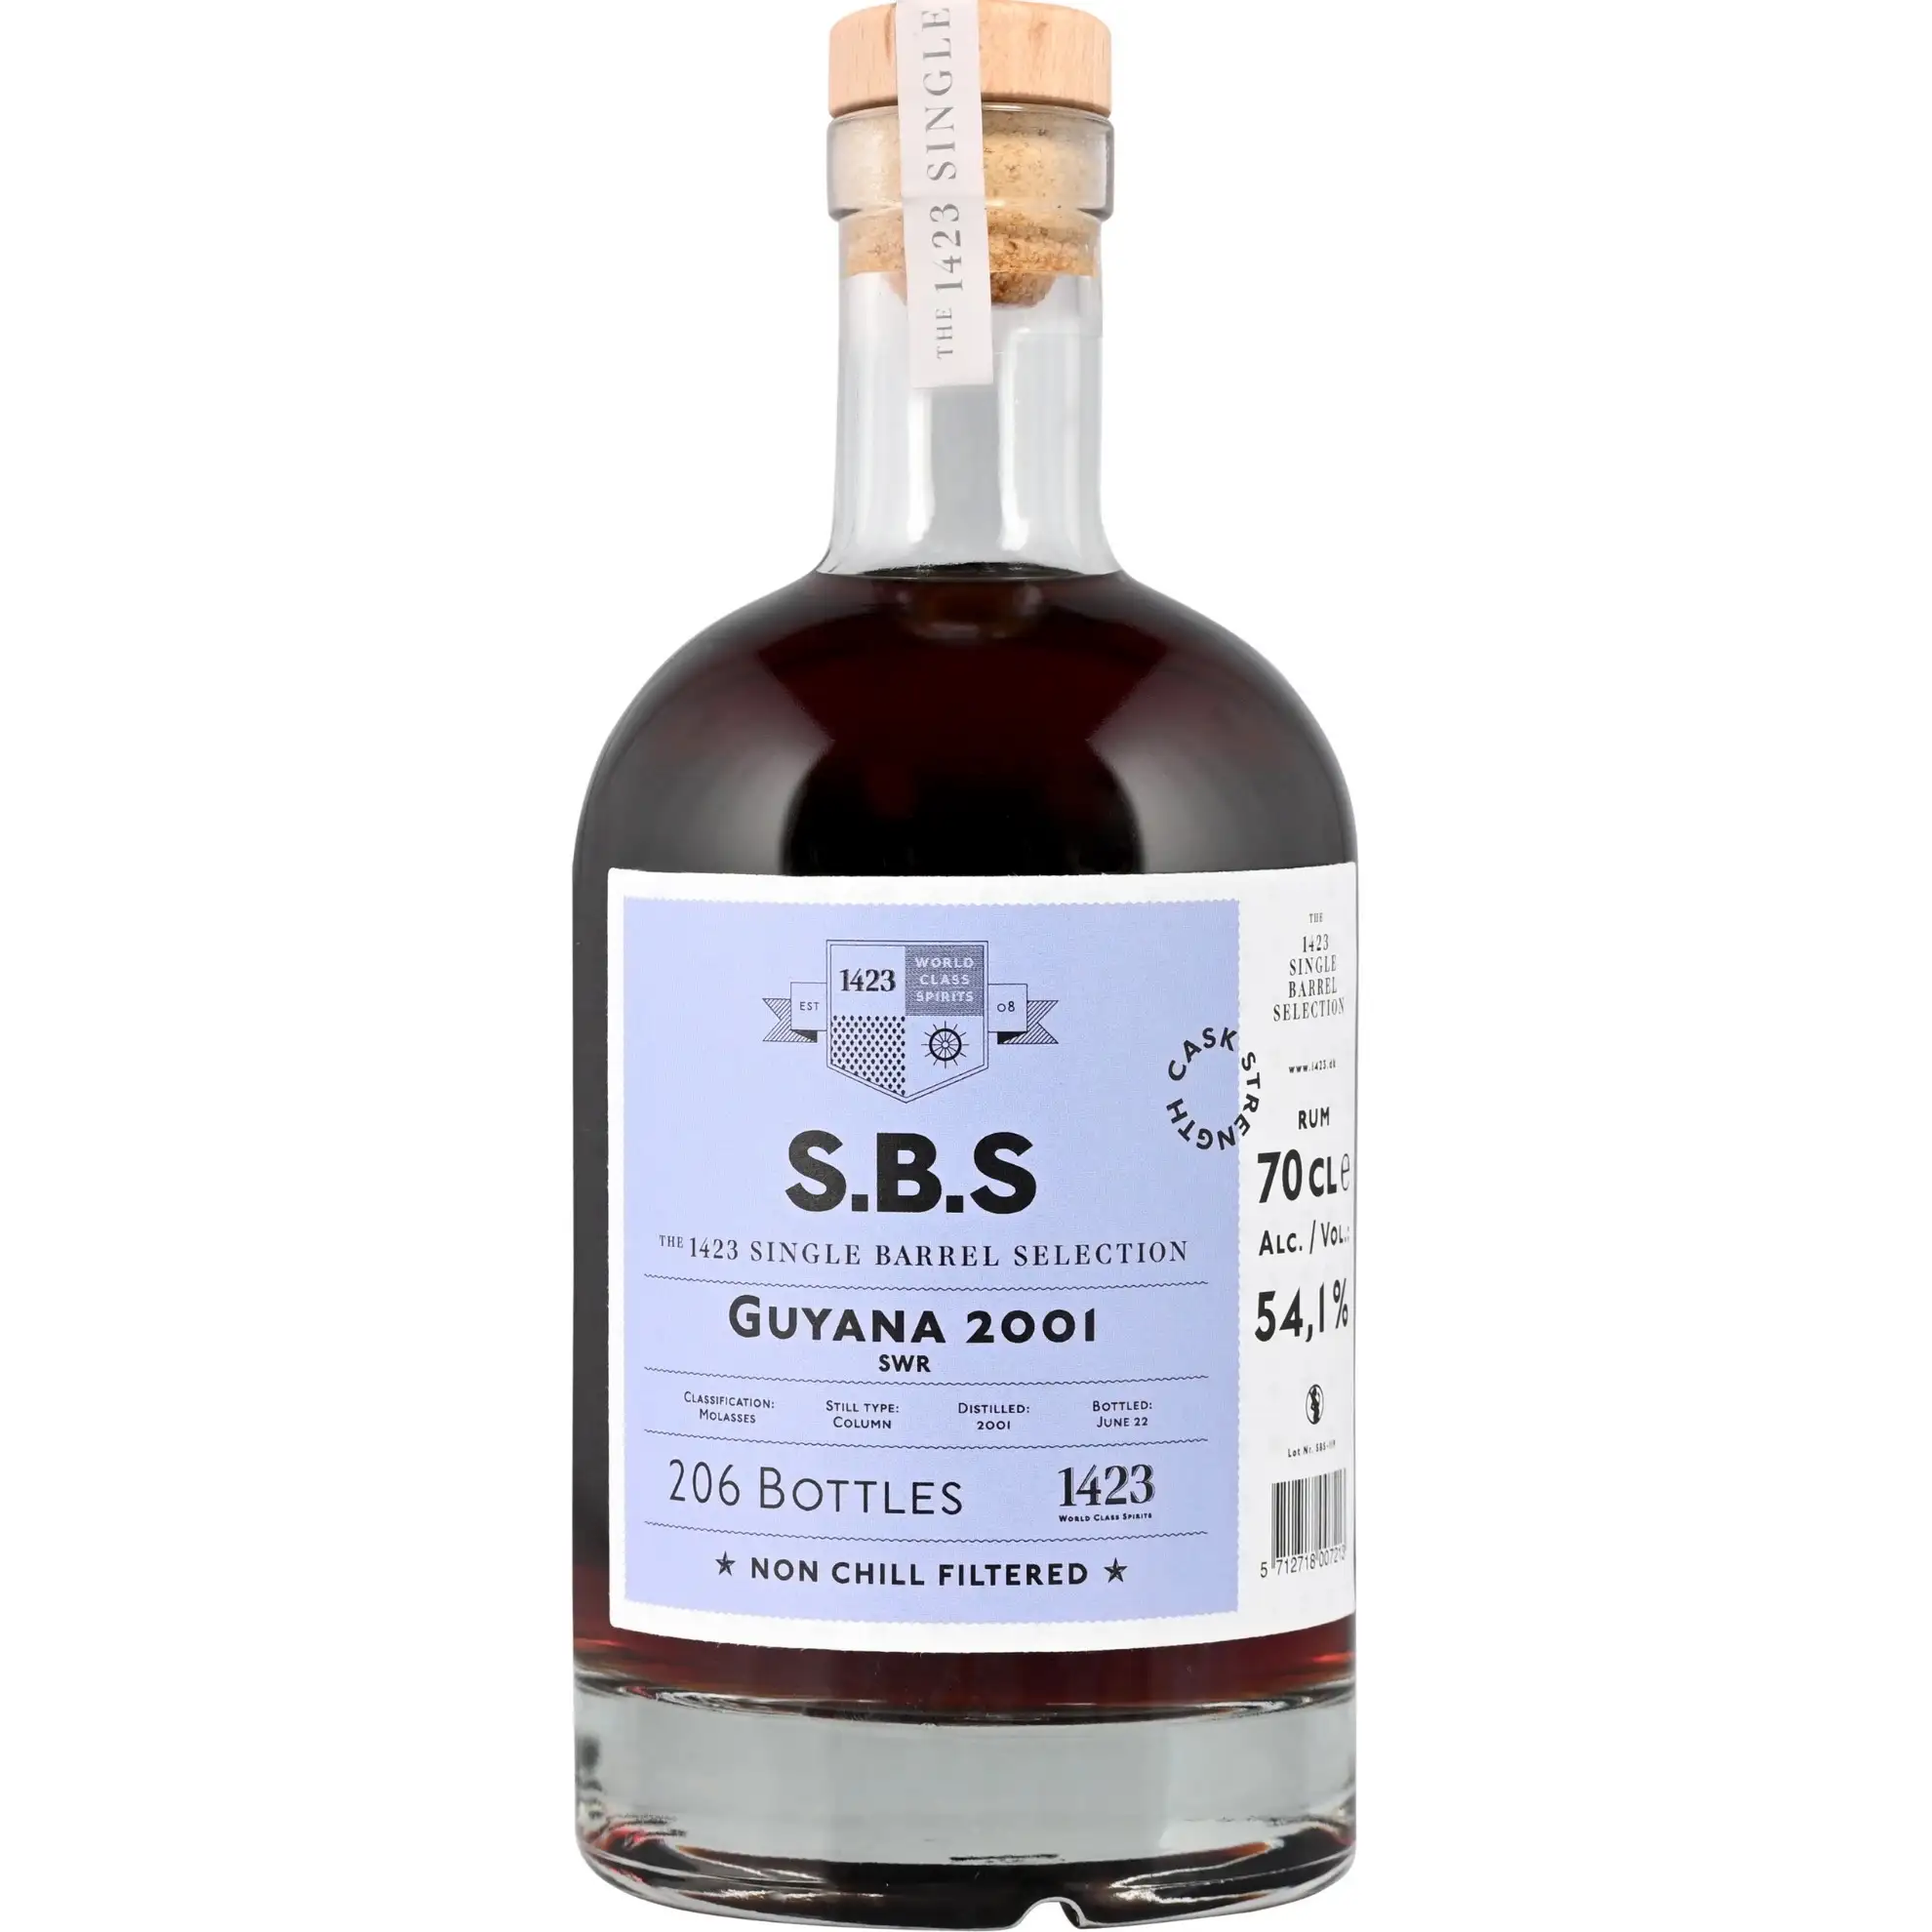 Image of the front of the bottle of the rum S.B.S Guyana SWR